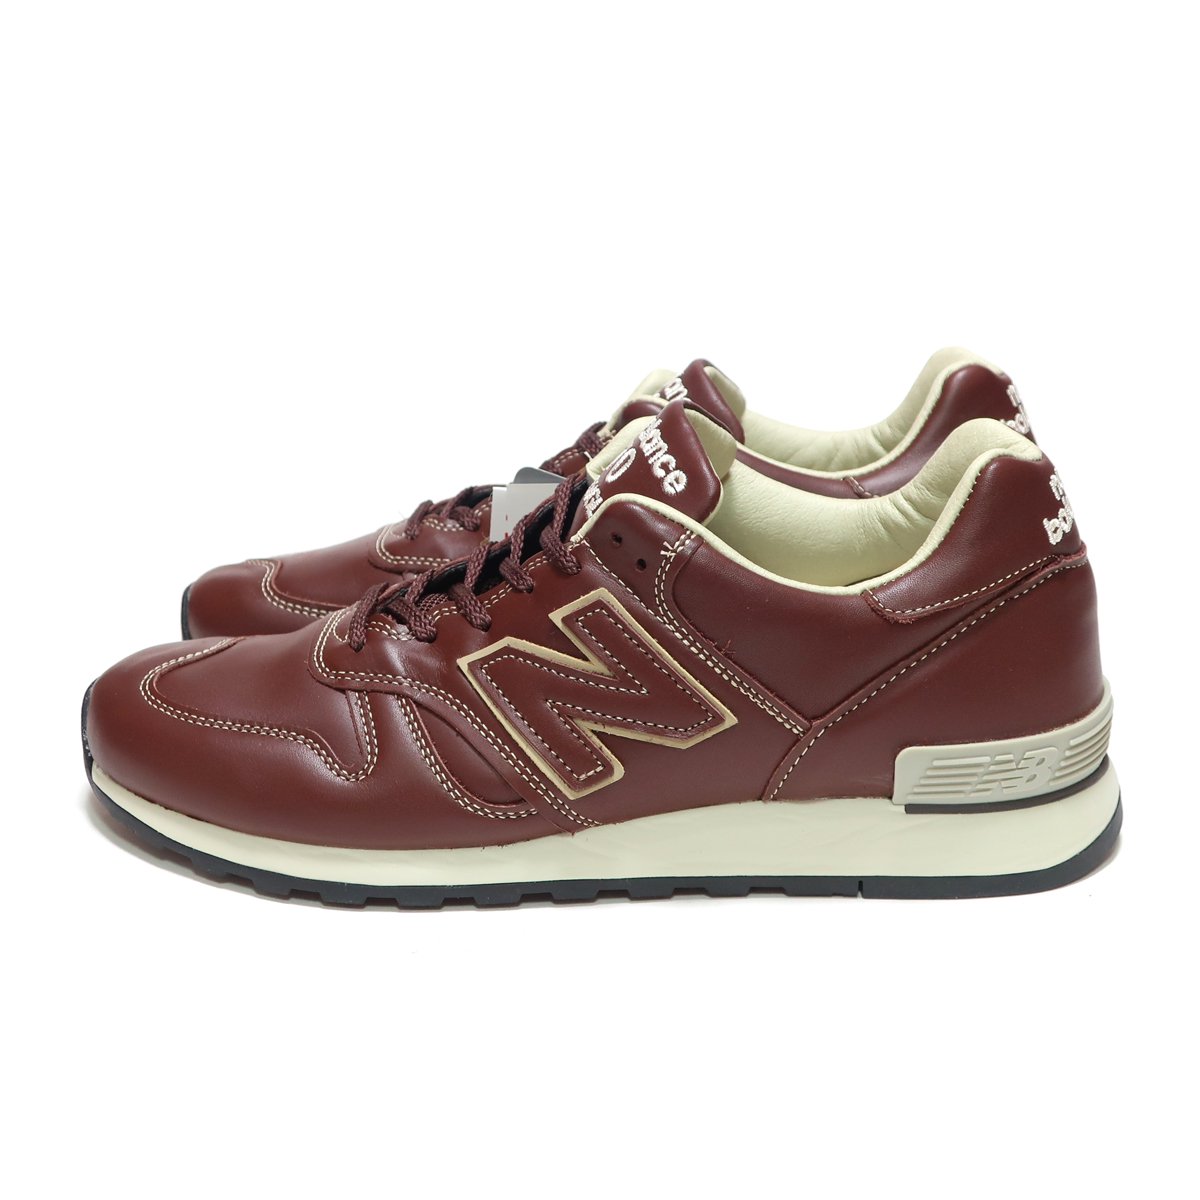 NEW BALANCE M670BRN BROWN LEATHER MADE IN ENGLAND ( ニューバランス ...